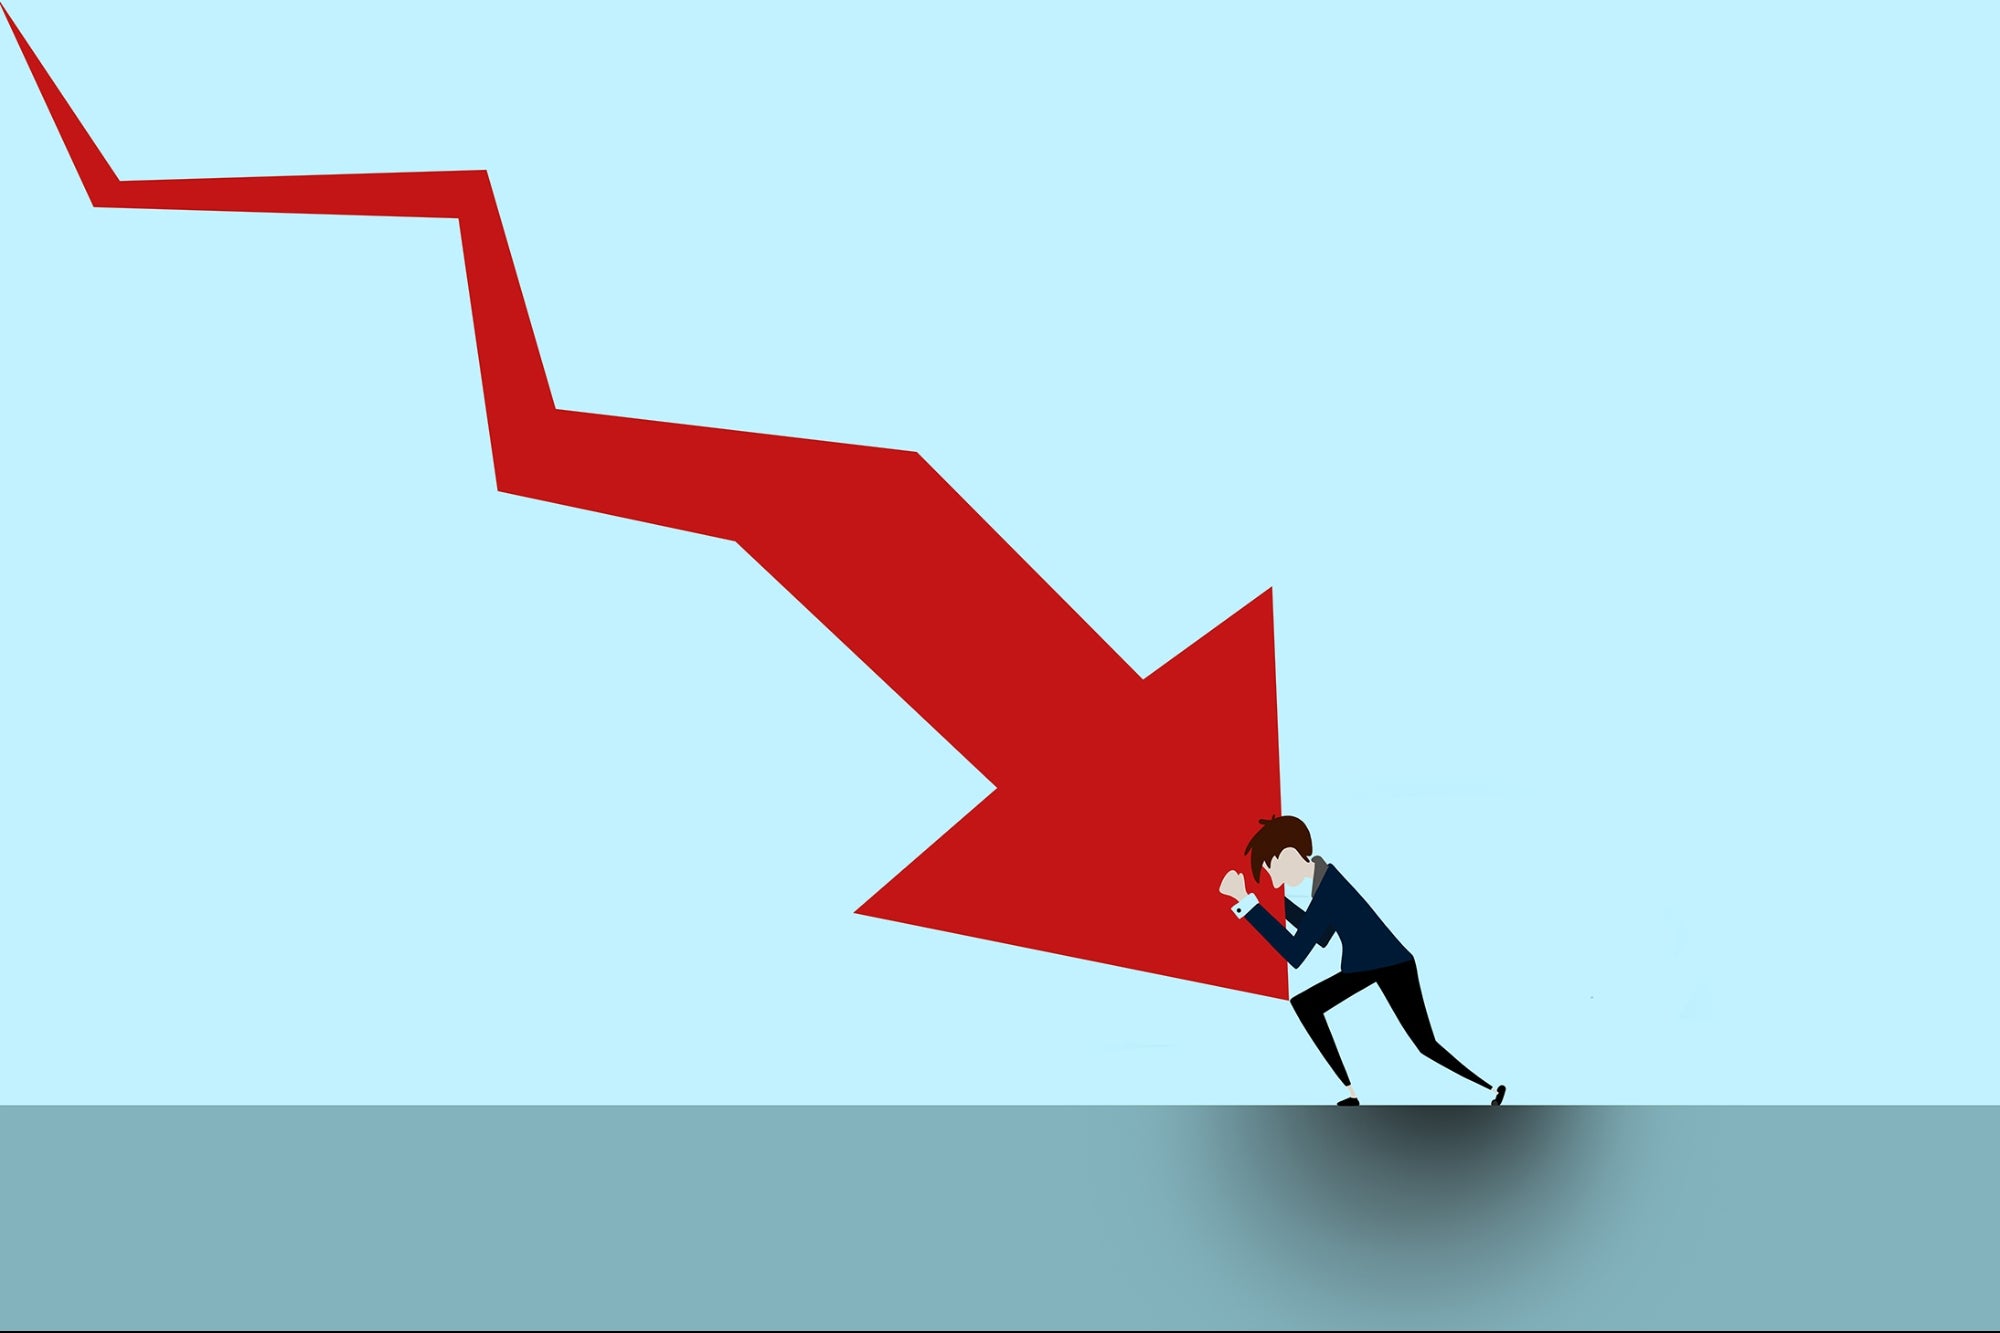 Scared of a Recession? Follow These 5 Tips For a Recession-Proof Business